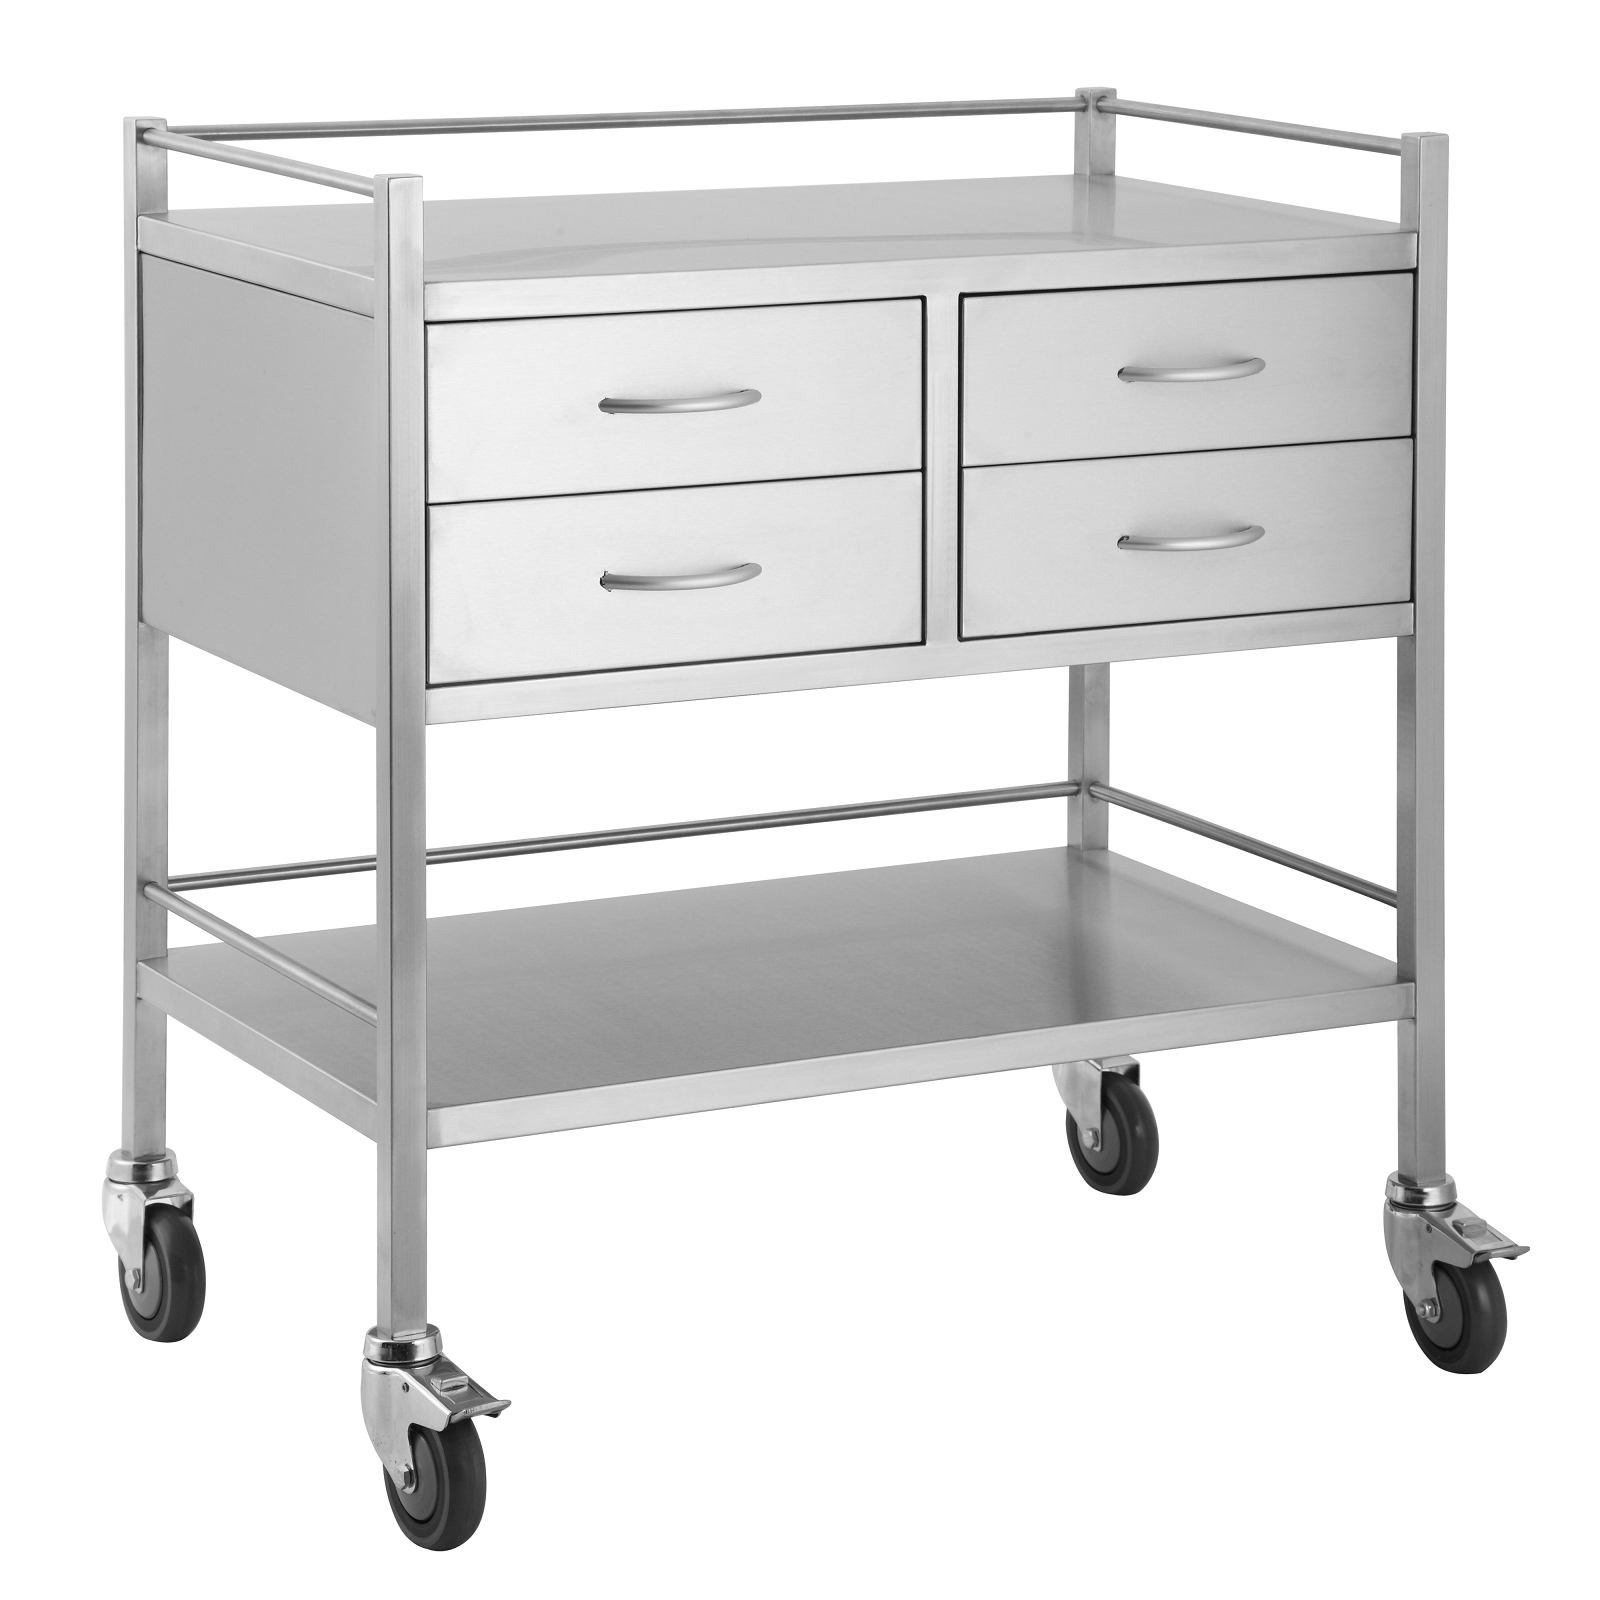 A high grade double four drawer stainless steel trolley. Has top and bottom side rails and lockable castors for safety.